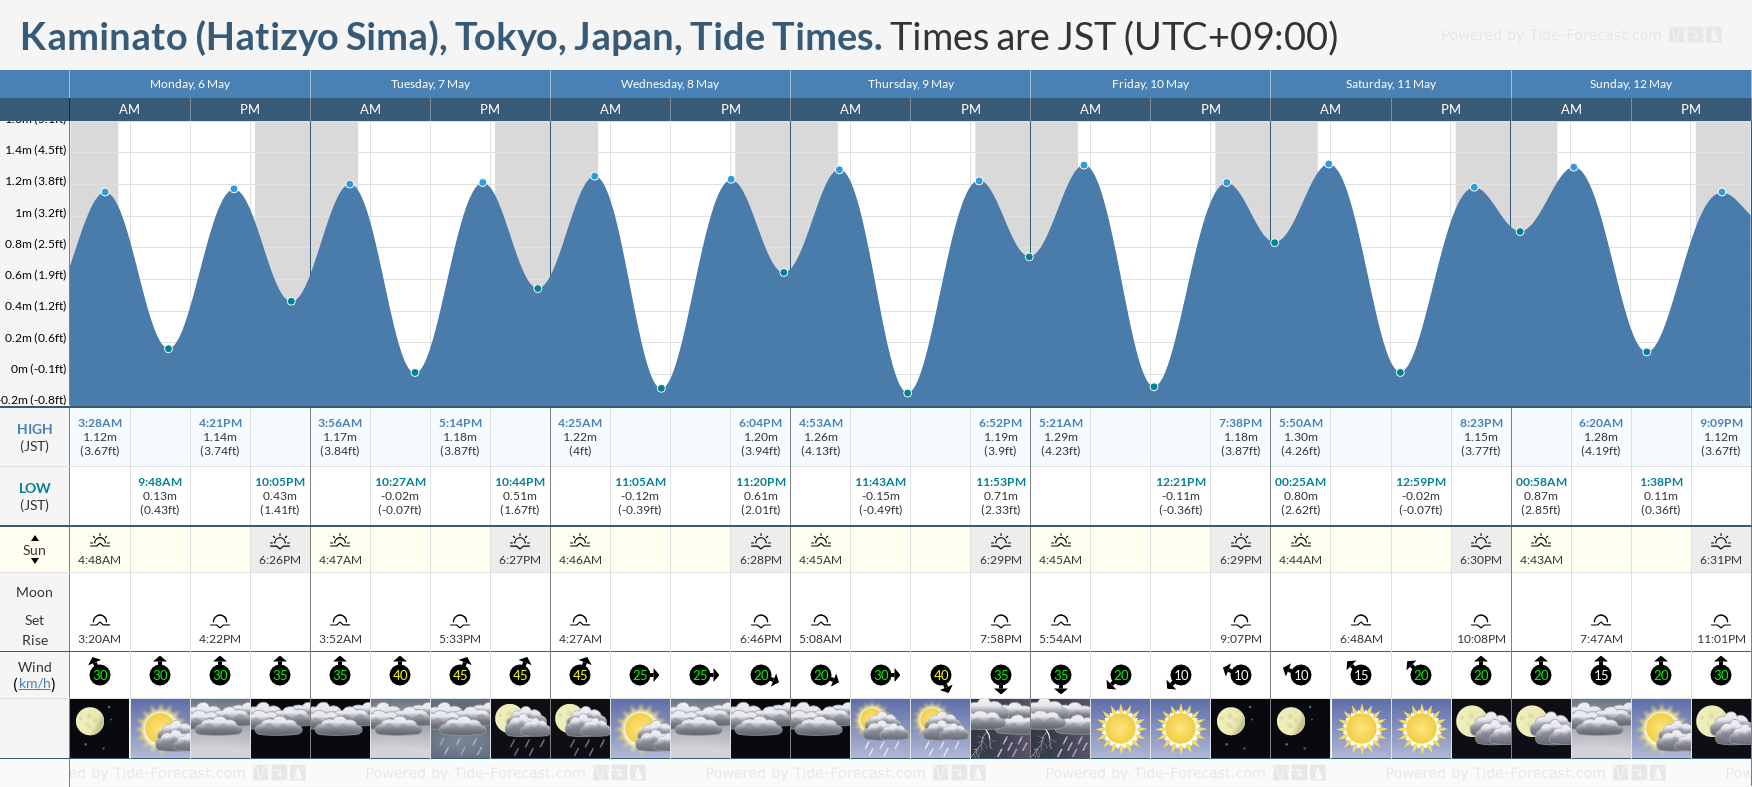 Kaminato (Hatizyo Sima), Tokyo, Japan Tide Chart including high and low tide tide times for the next 7 days